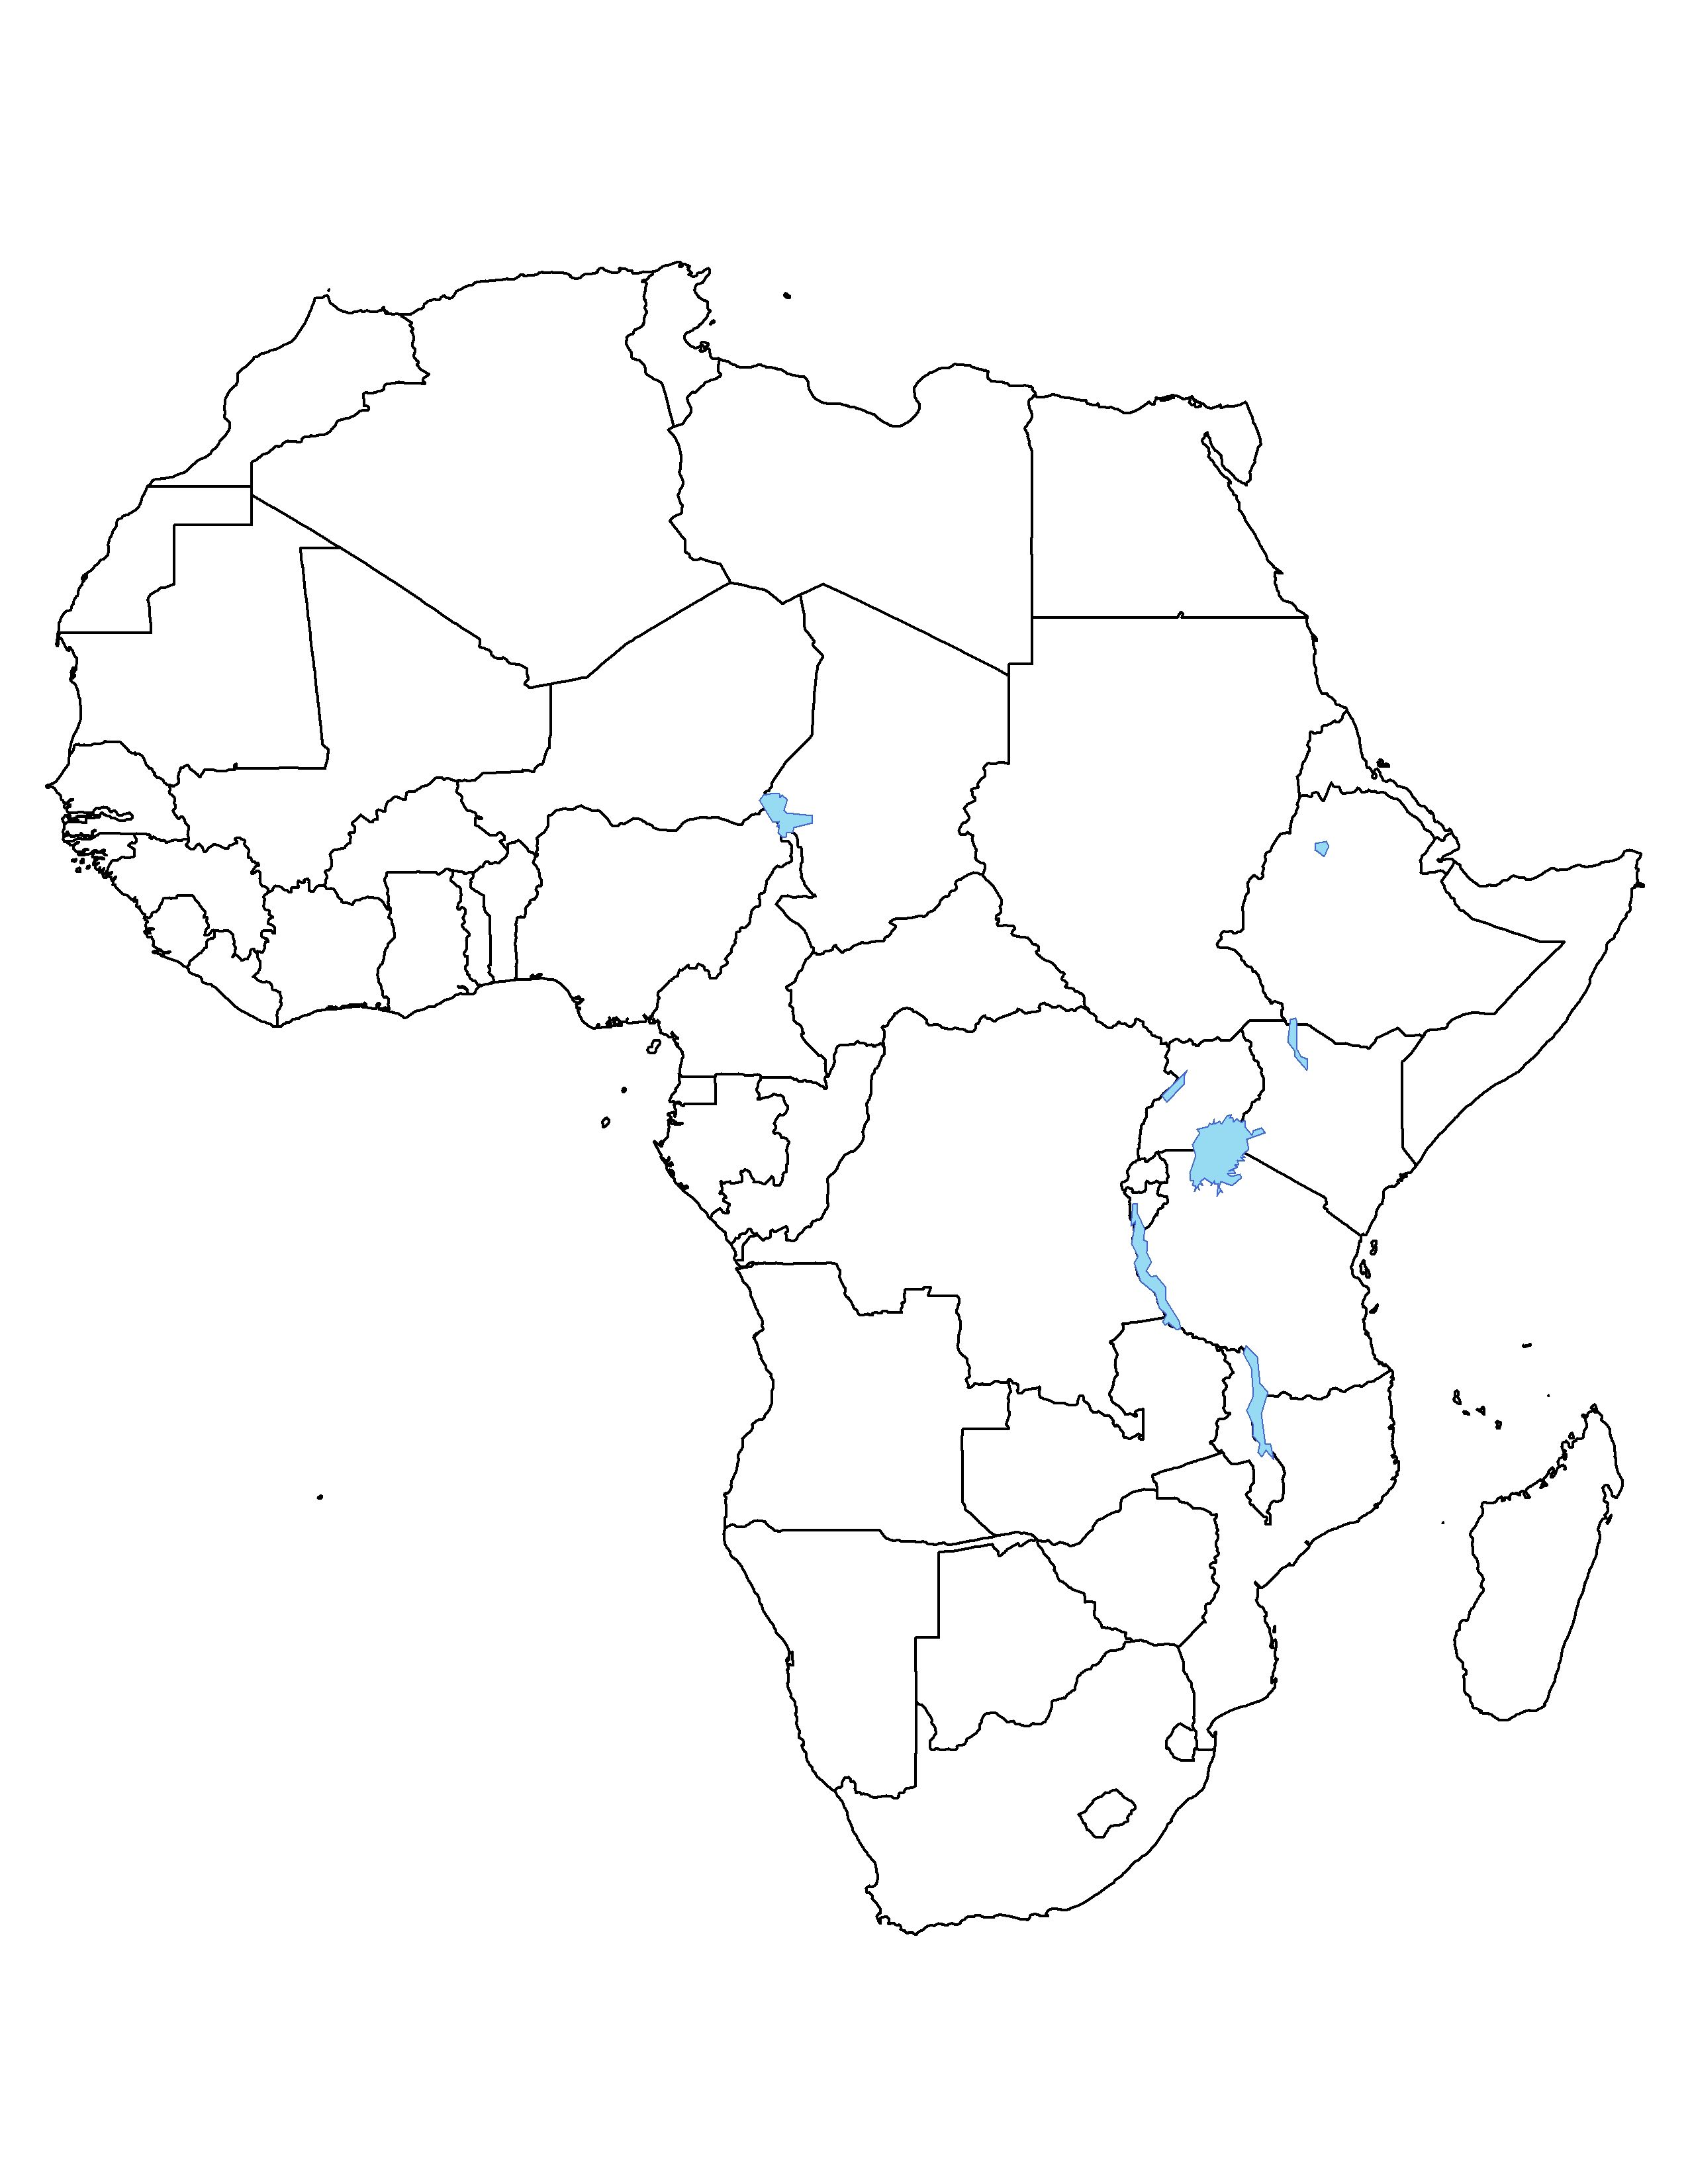 Africa clipart printable. Blank map of best